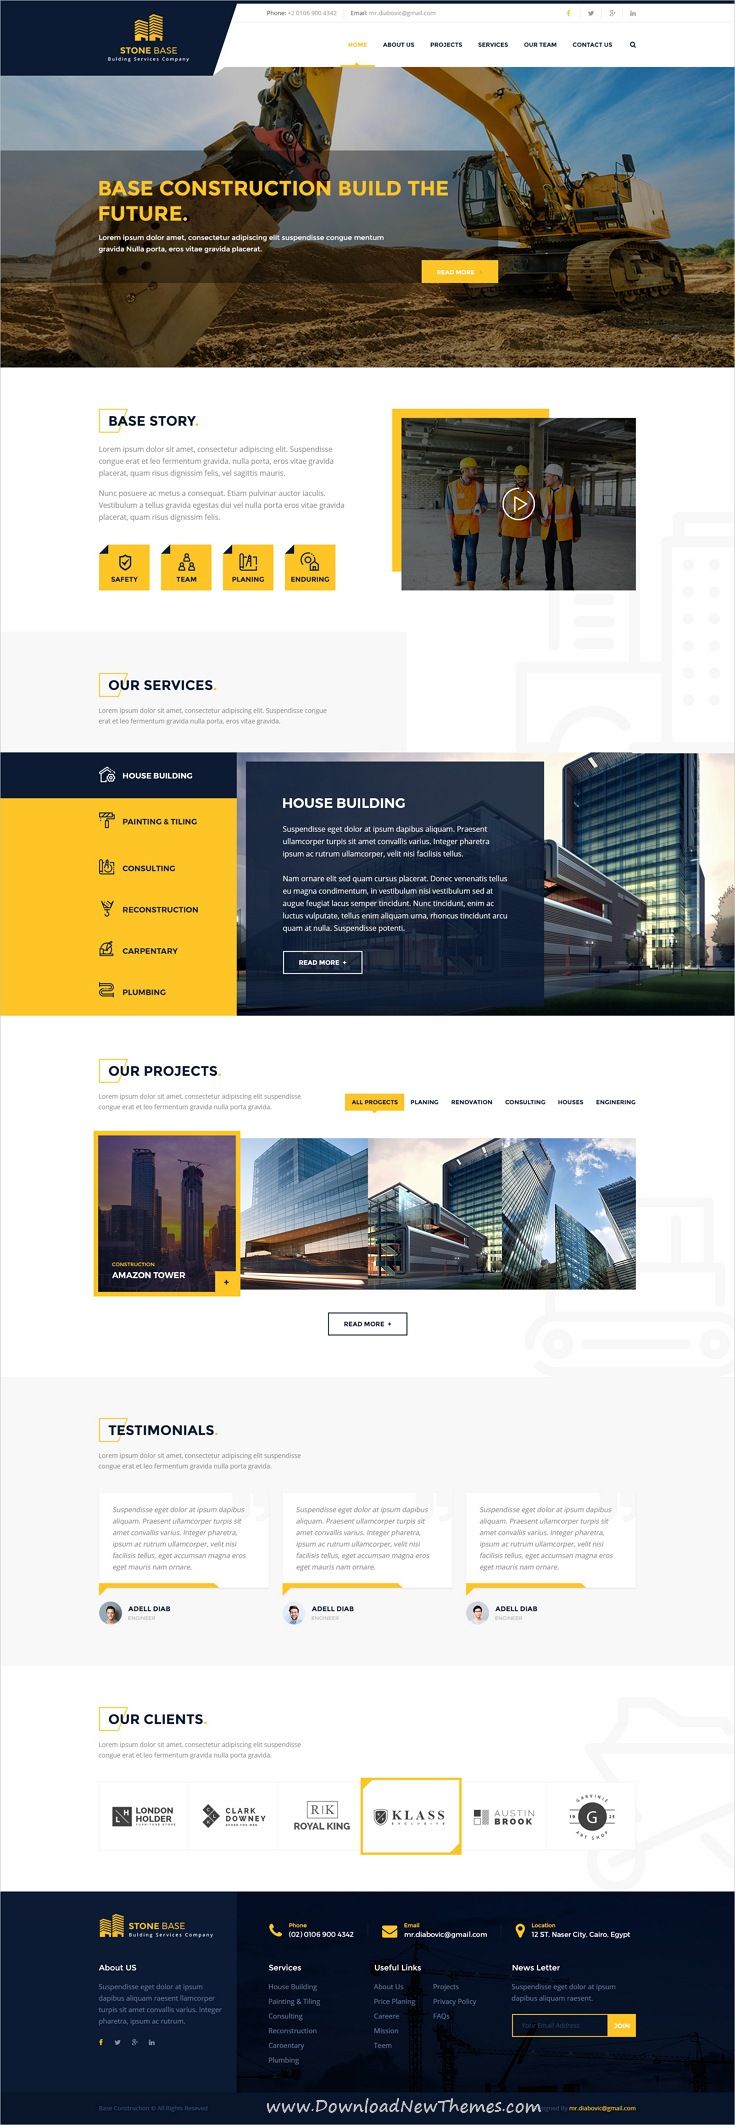 Stone Base is a clean and modern design #PSD #template for #construction and bui...